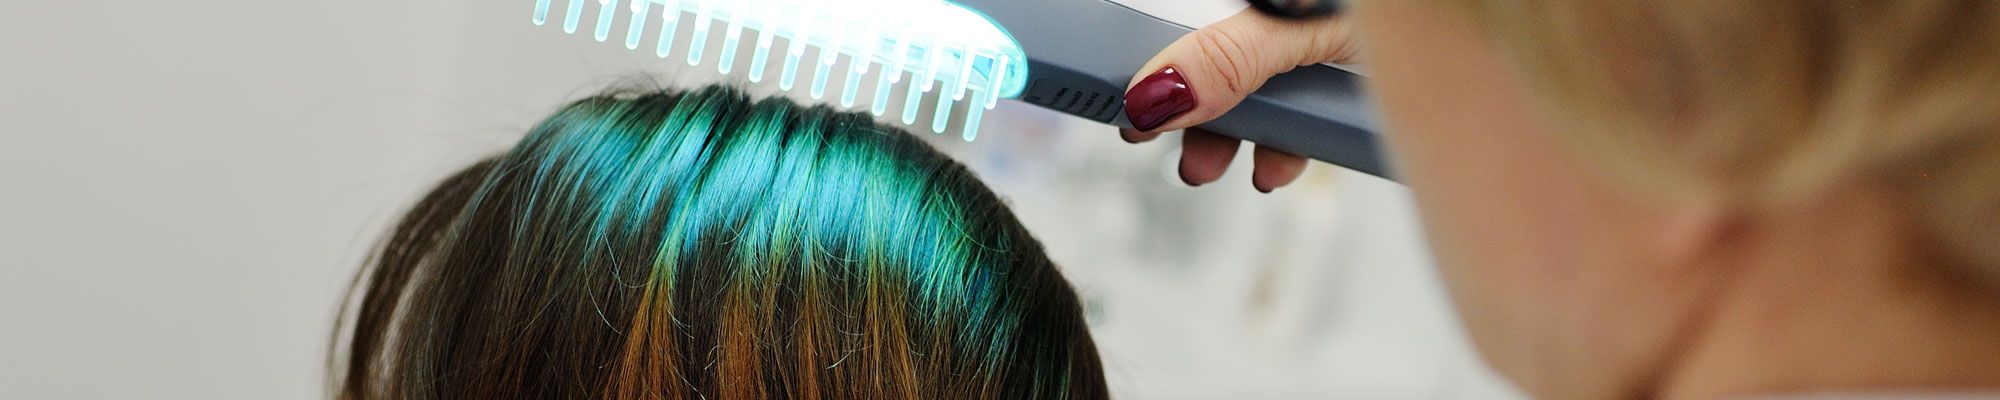 Hair loss treatment being performed on young woman